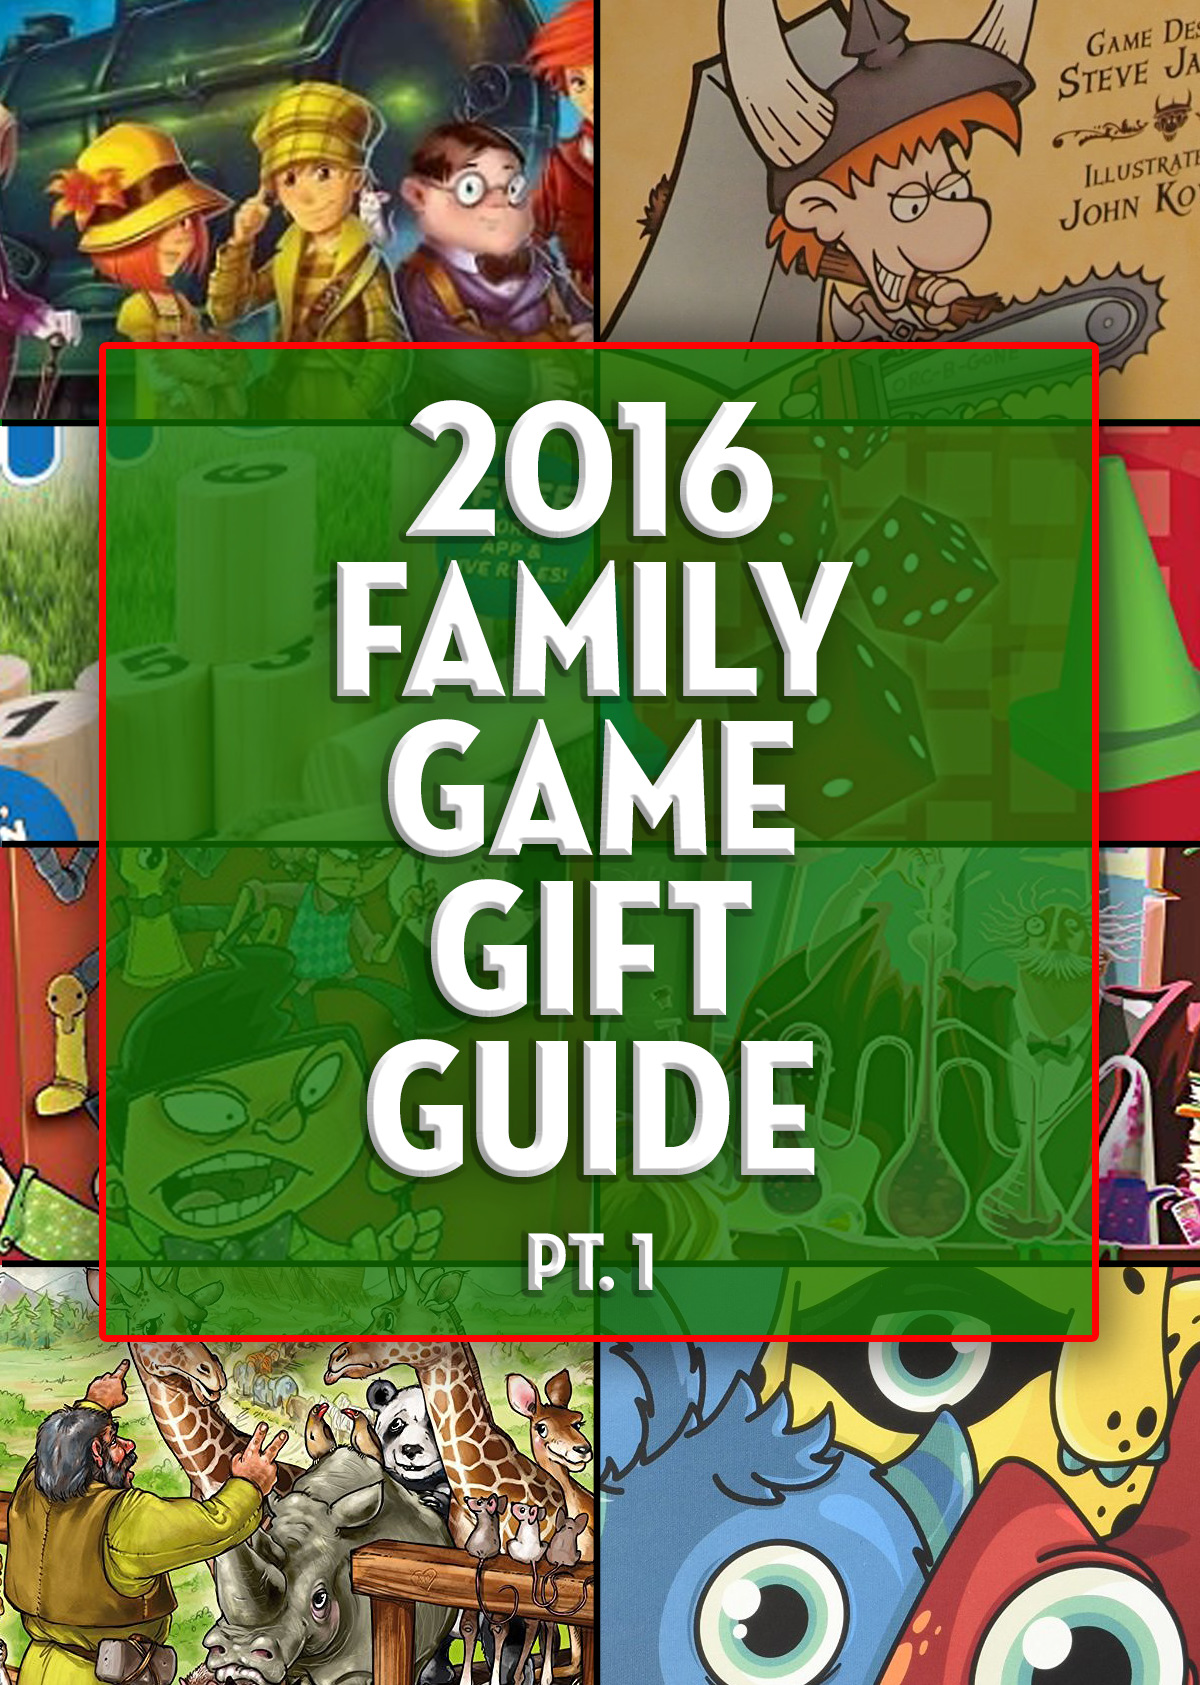 We break down some of the best family games of 2016 that certainly should be in your collection! - SahmReviews.com